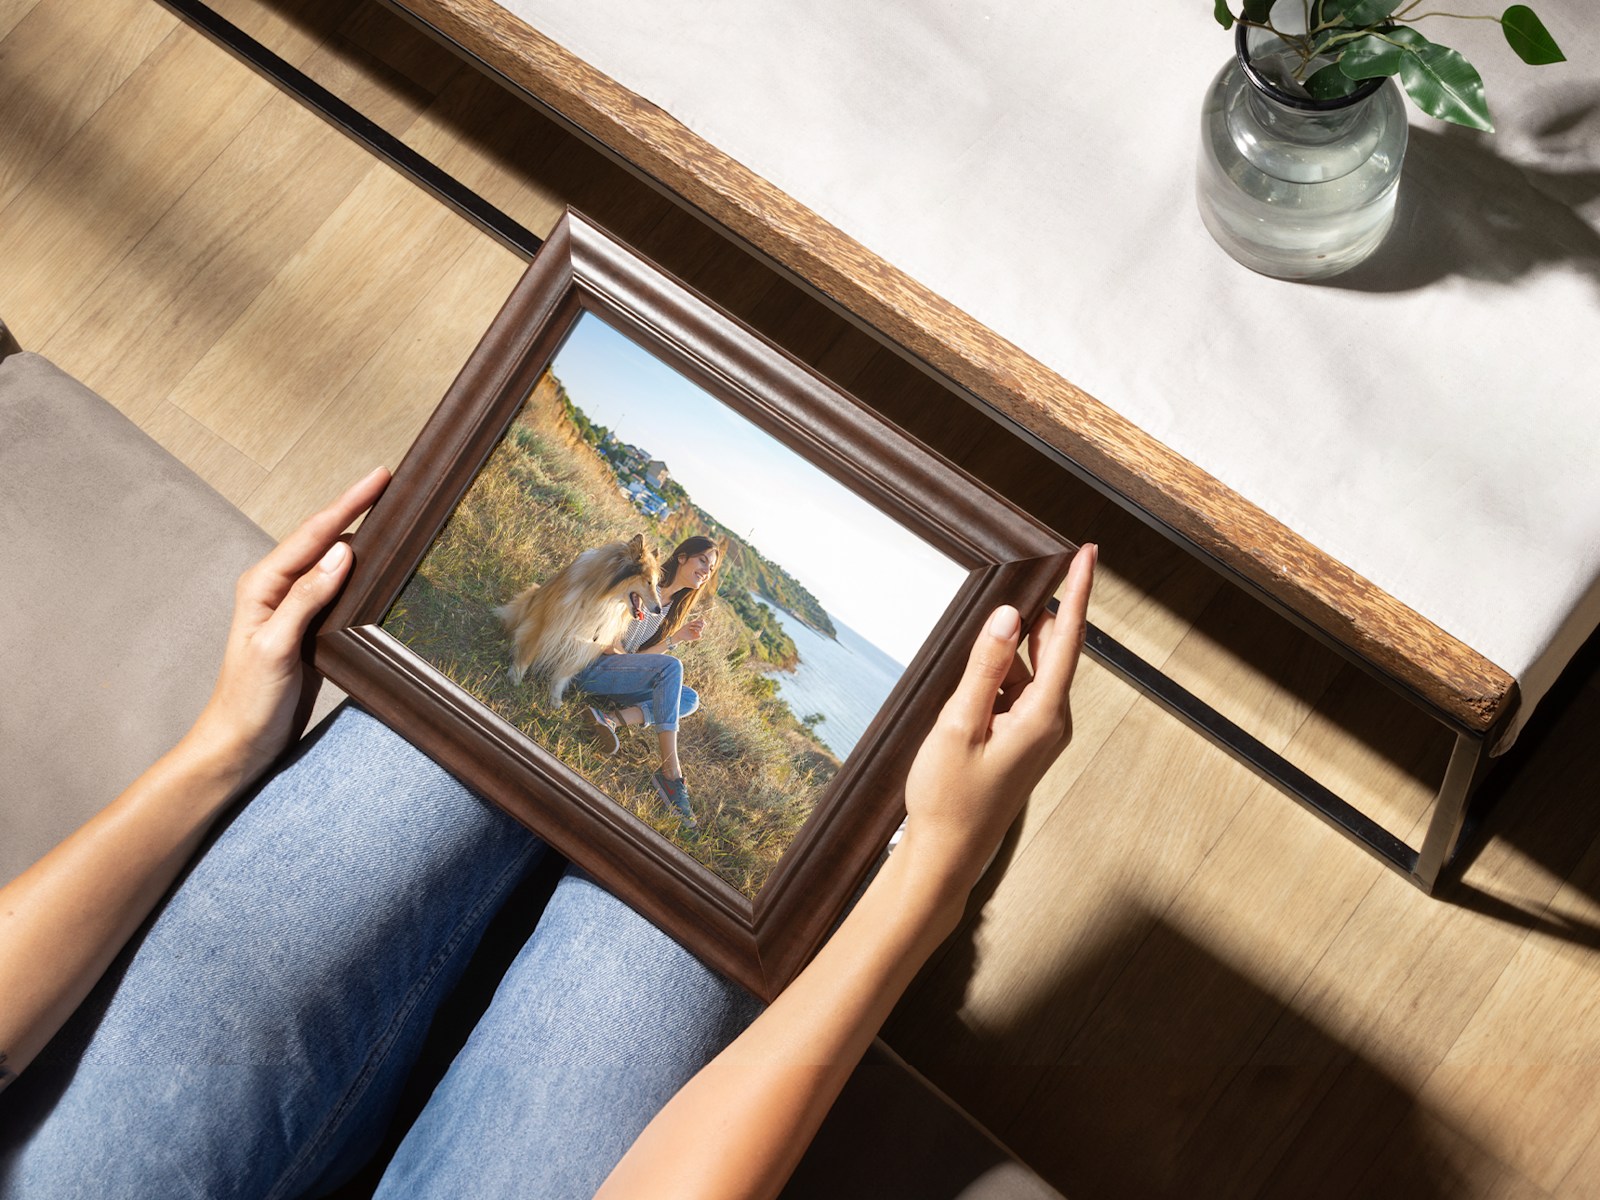 A photo print in a walnut frame is held by a pair of hands.